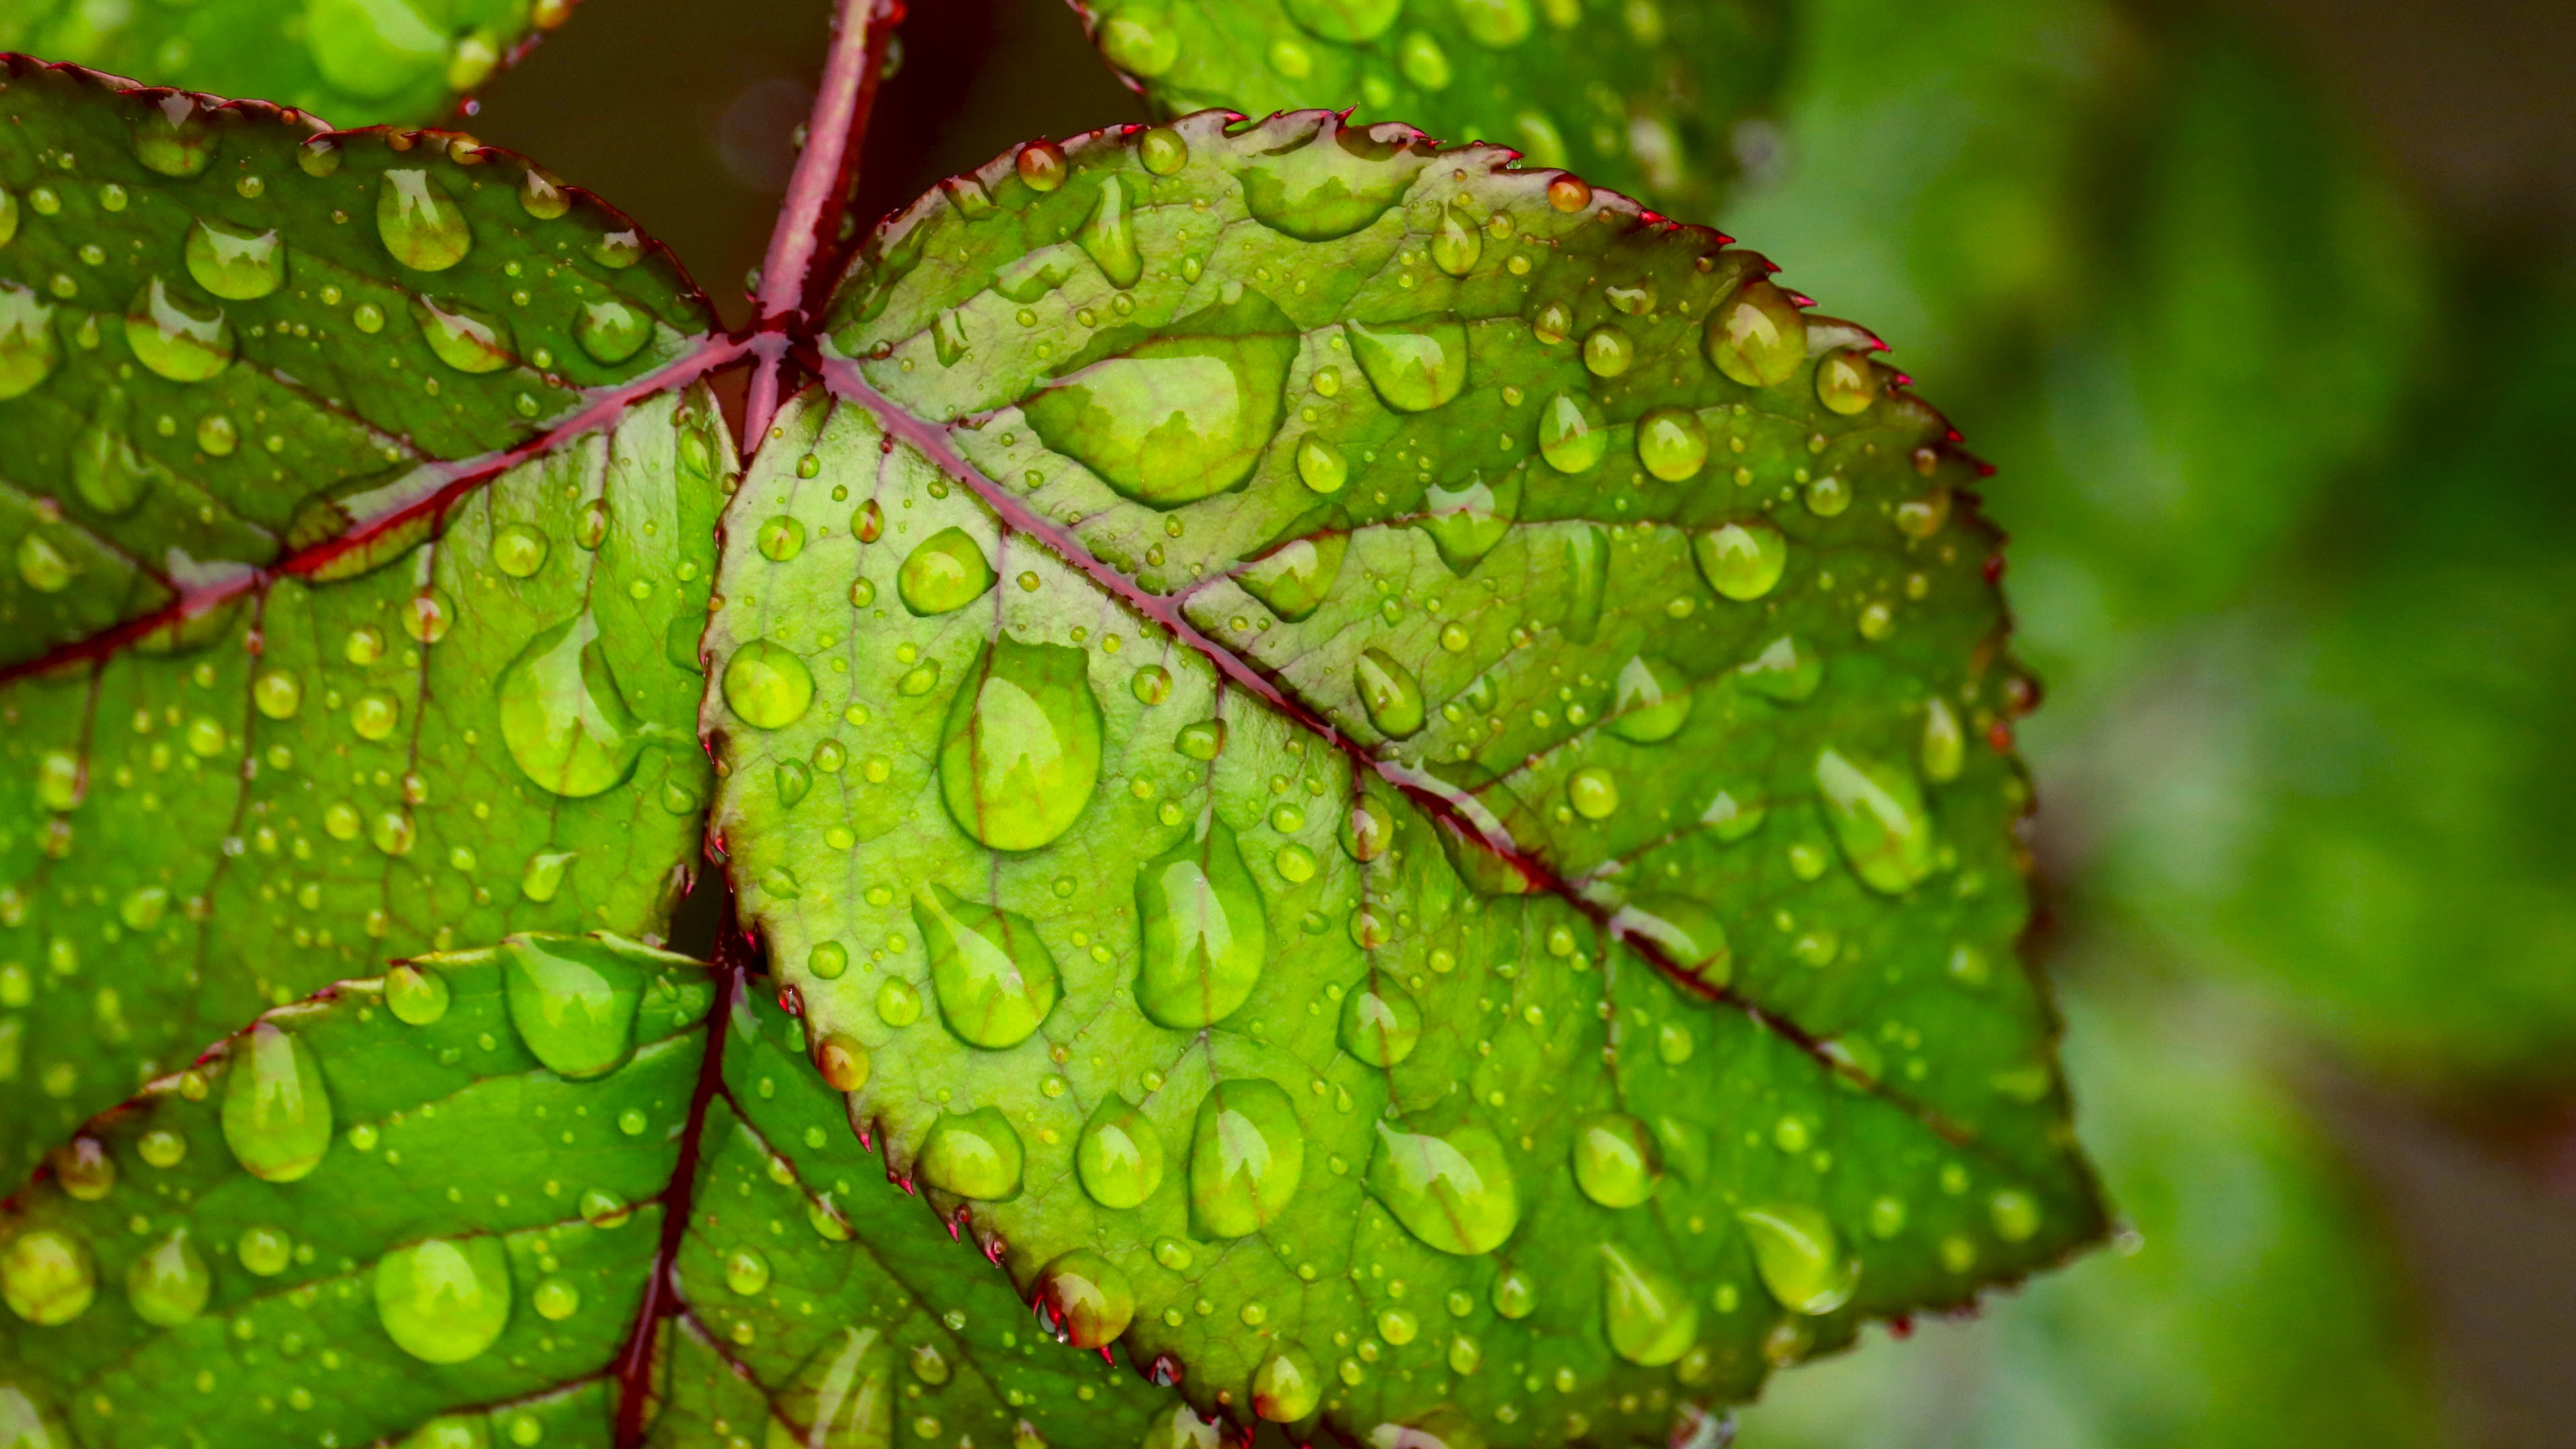 Water droplets on green leaf 4K Ultra HD Wallpapers for Mobile phones